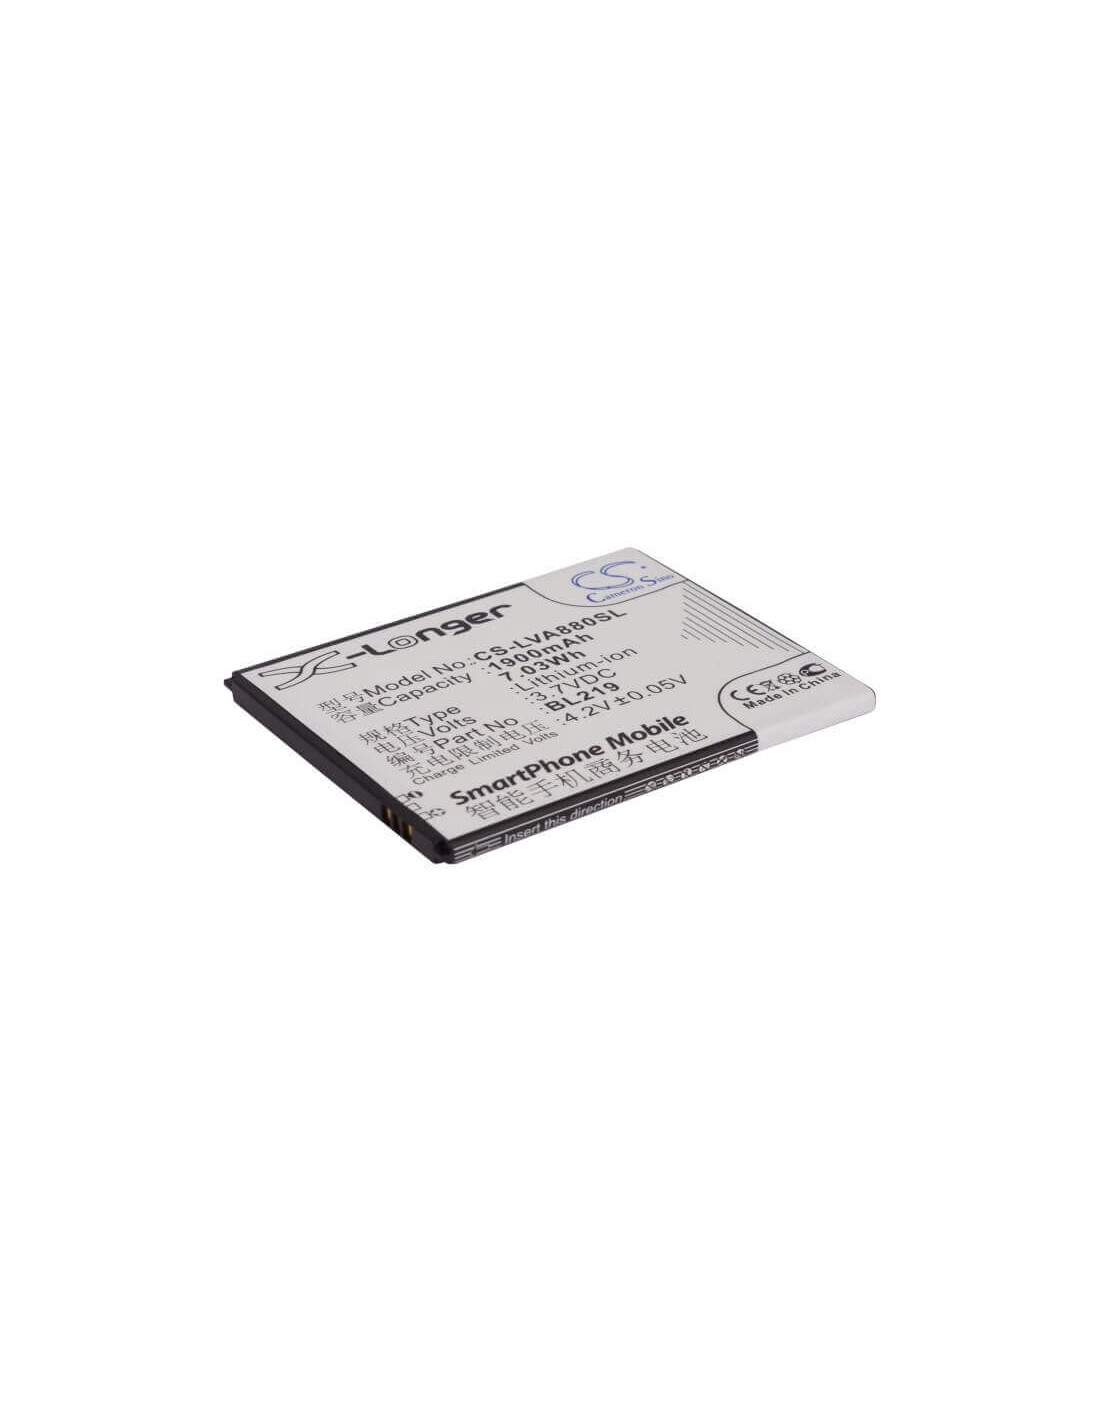 Battery for Lenovo A880, A889, A388t 3.7V, 1900mAh - 7.03Wh